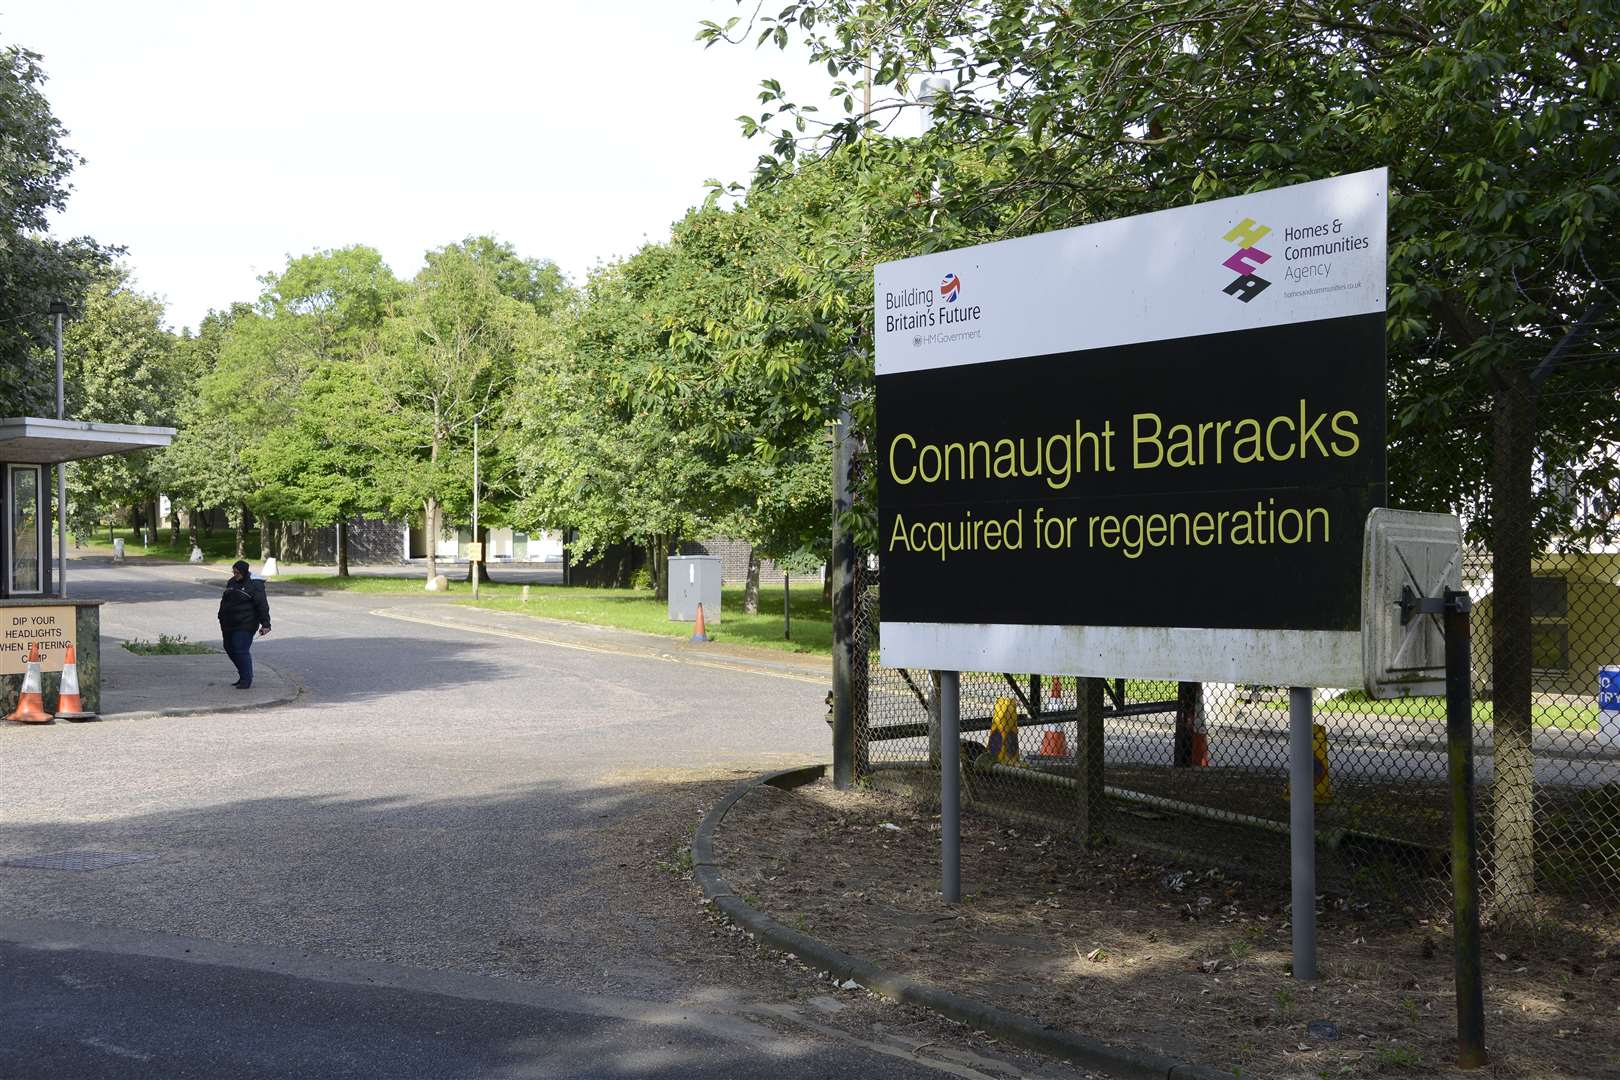 The Connaught Barracks site in 2014, Picture: Paul Amos